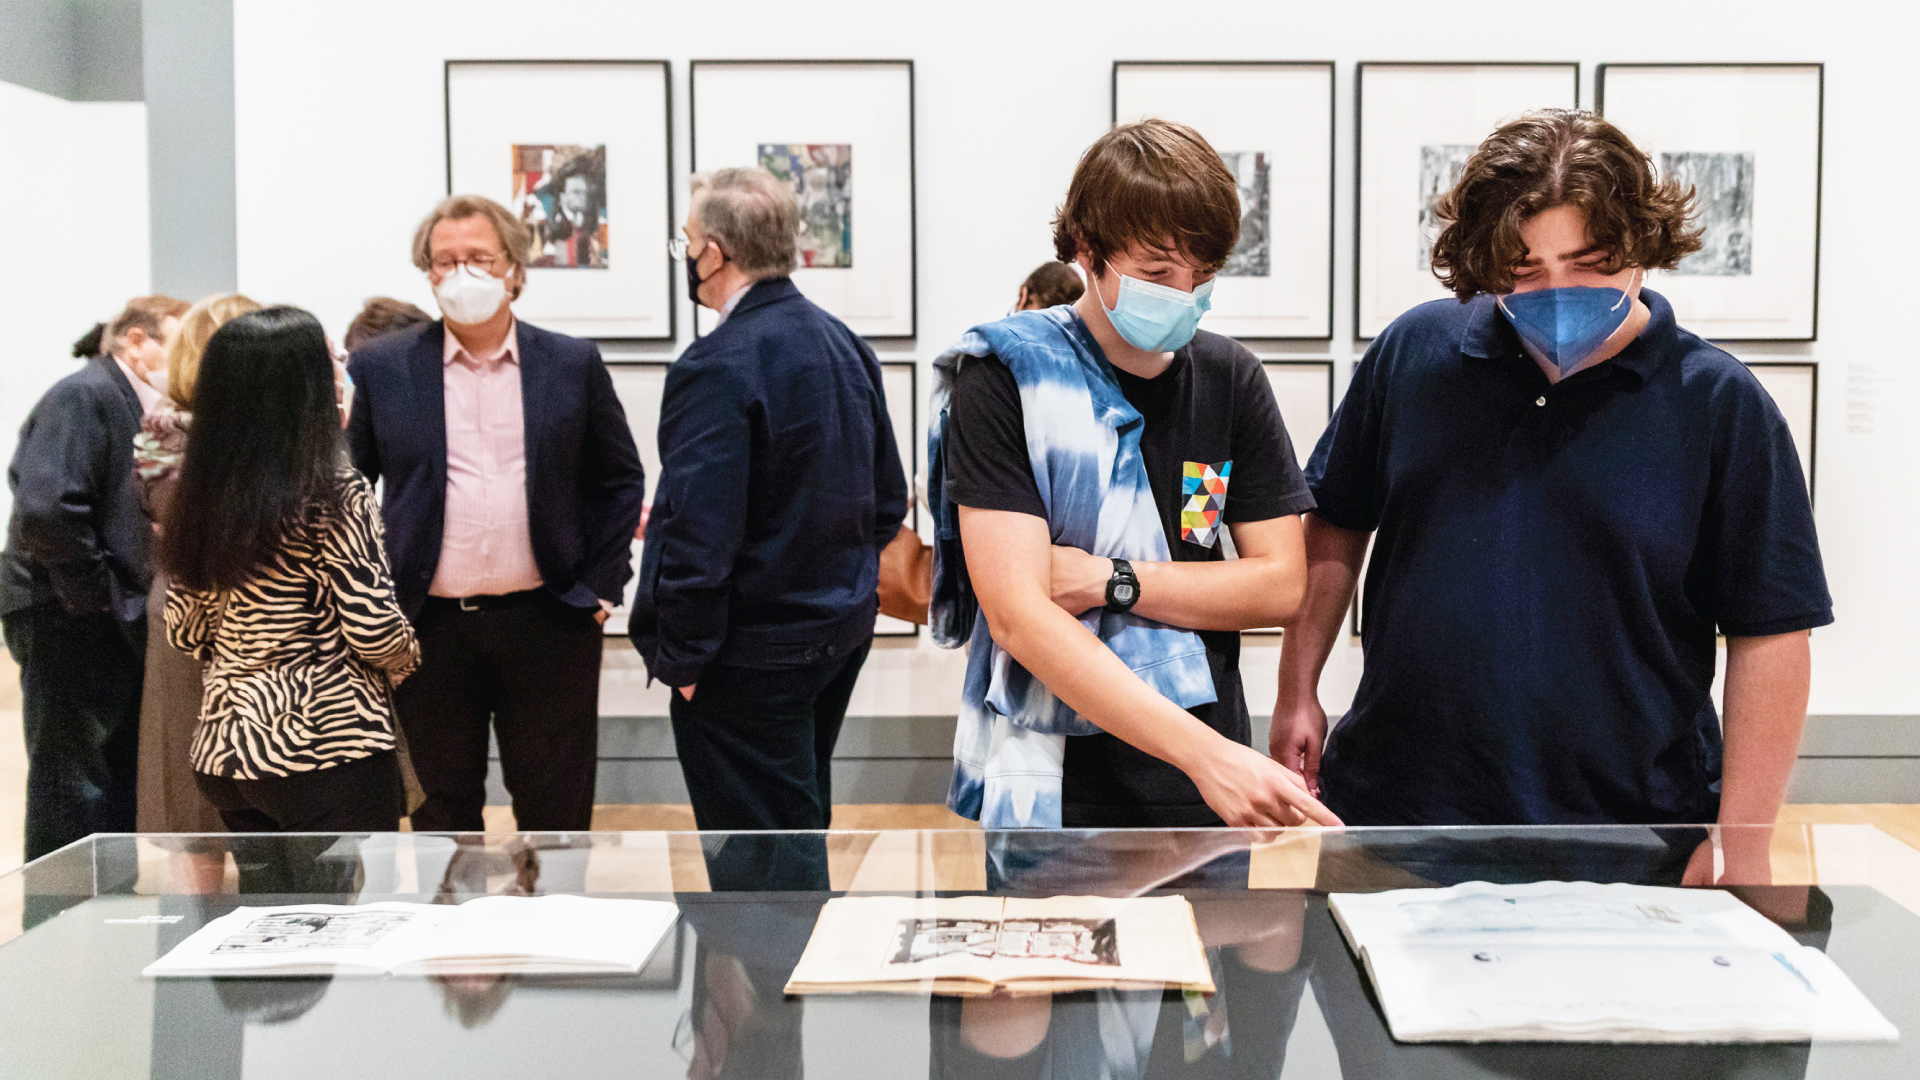 Students look at notebooks by artist Peter Sacks in the museum gallery